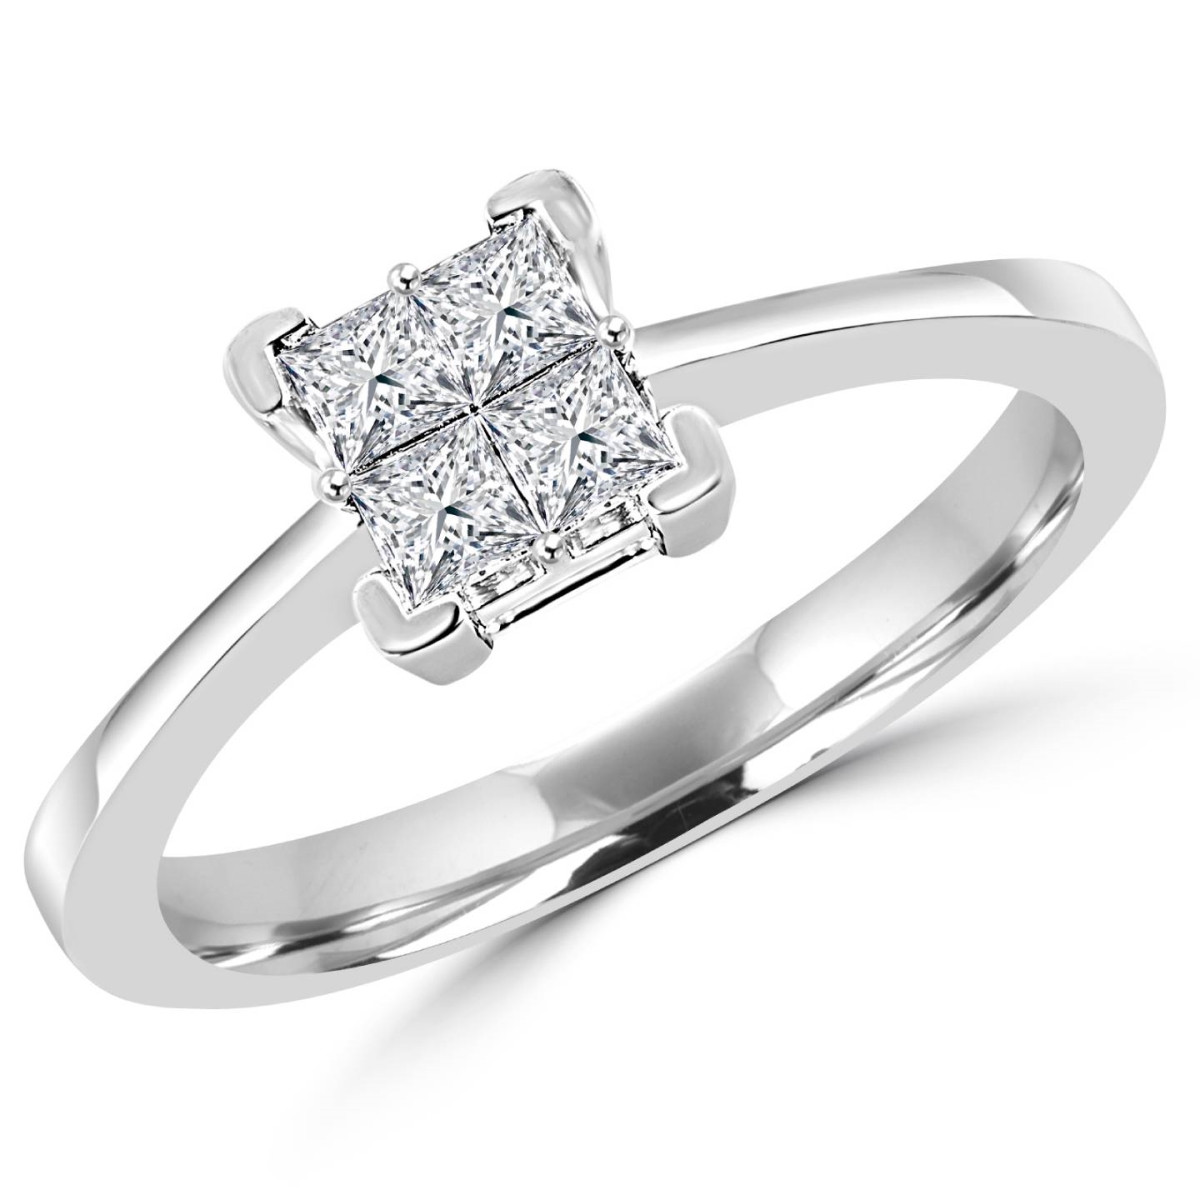 Picture of Majesty Diamonds MDR140108-8.75 0.38 CTW Invisible-Set Princess Cut Diamond Engagement Promise Ring in 14K White Gold - Size 8.75